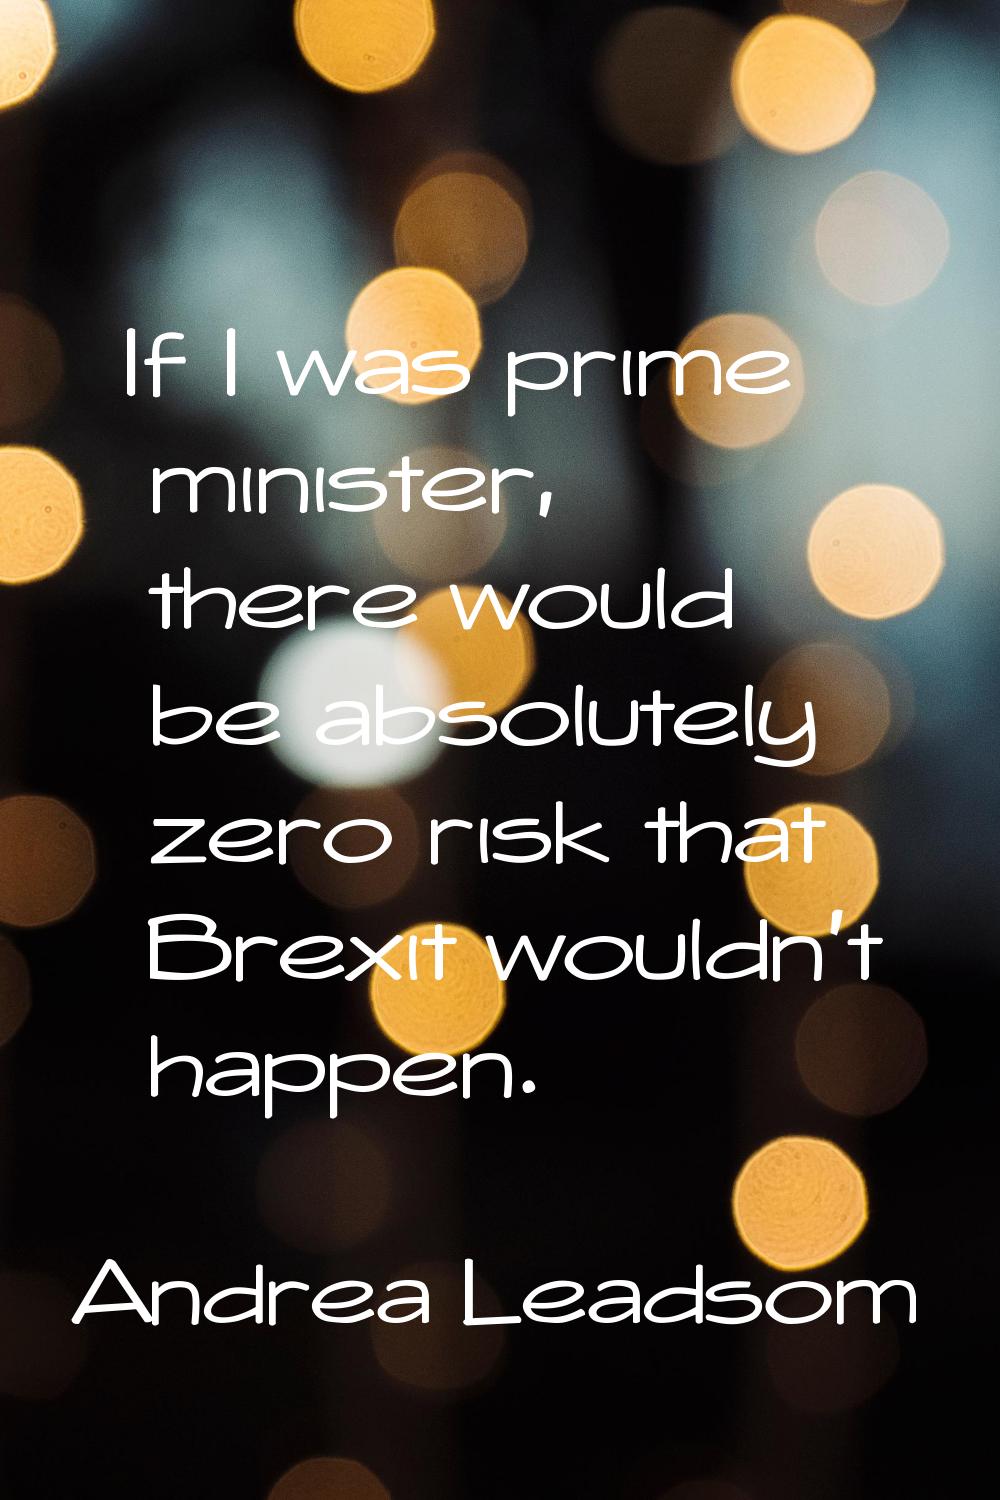 If I was prime minister, there would be absolutely zero risk that Brexit wouldn't happen.